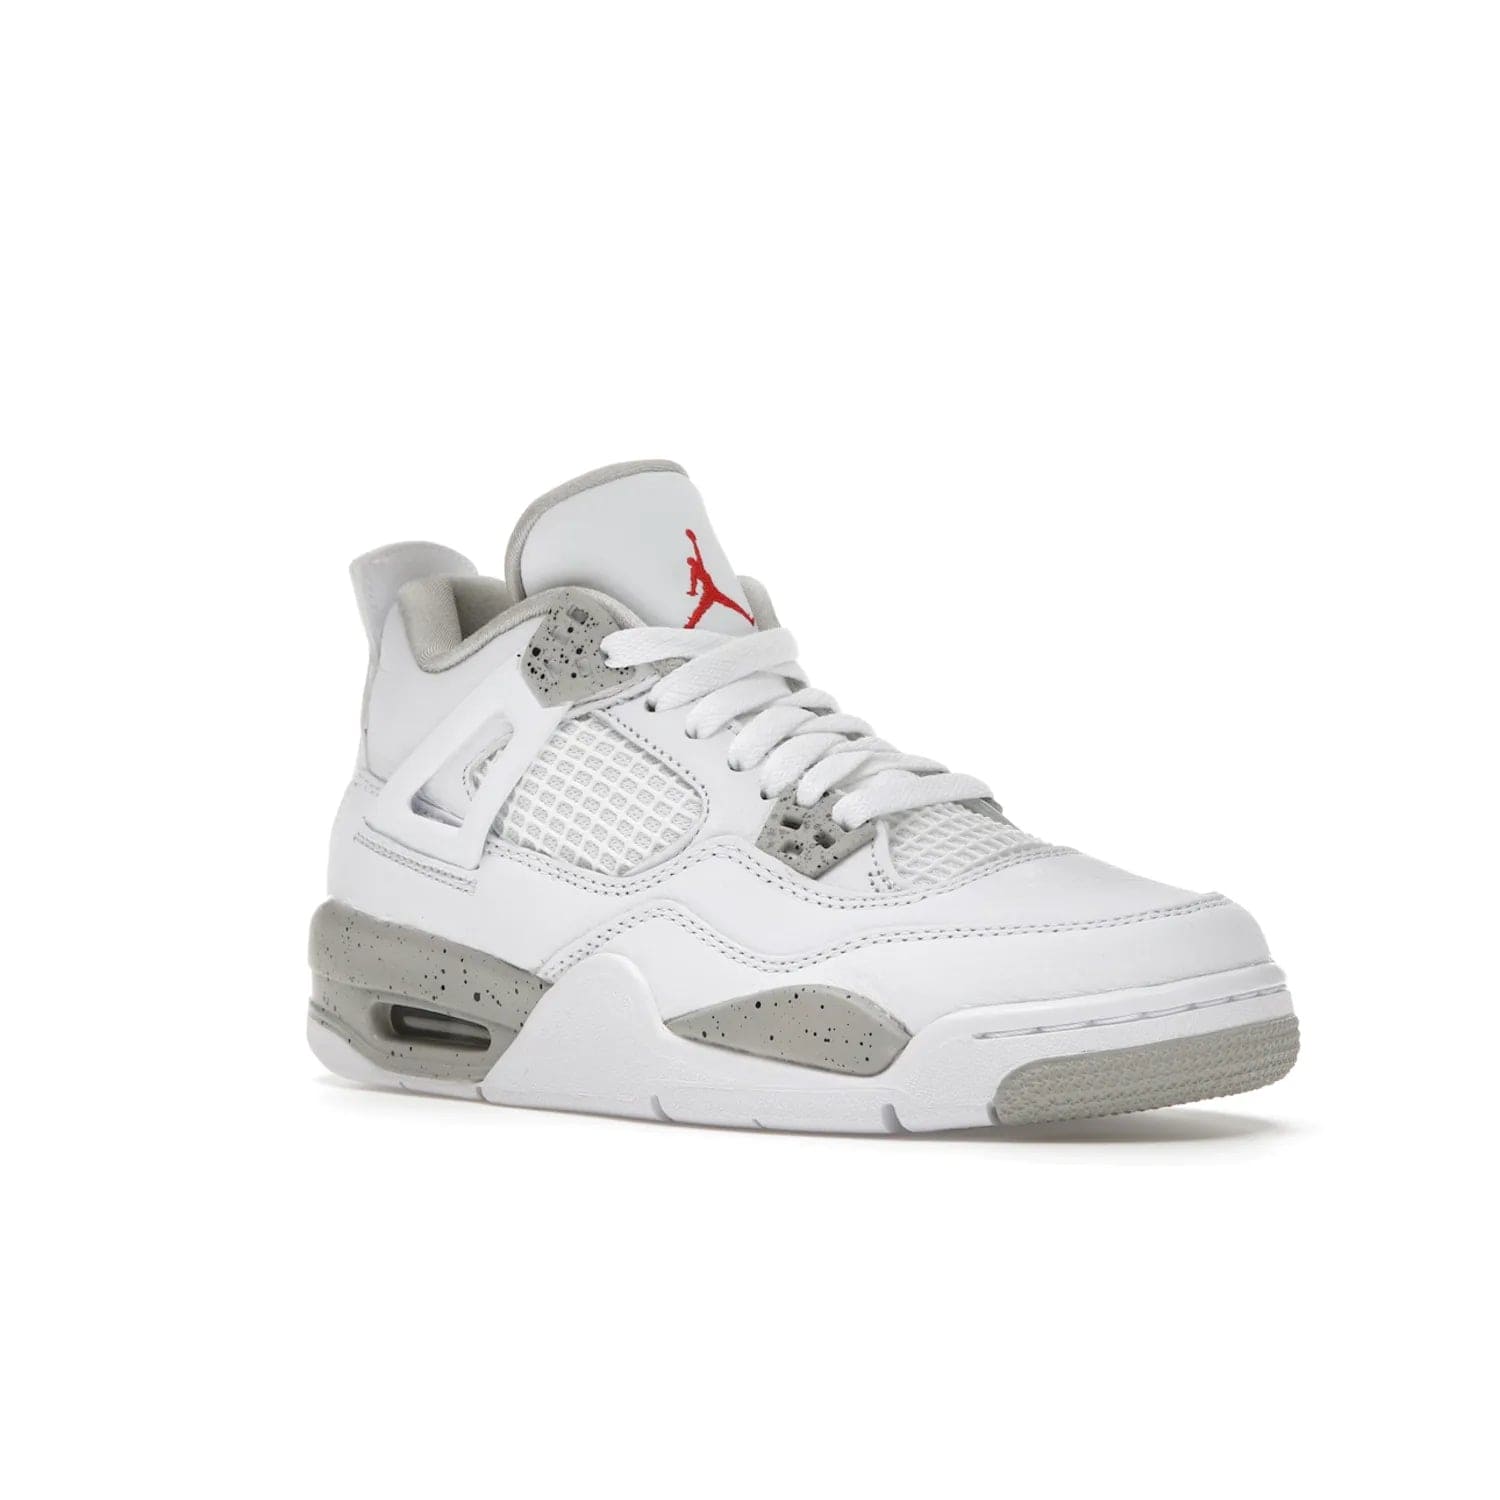 Jordan 4 Retro White Oreo (2021) (GS) - Image 5 - Only at www.BallersClubKickz.com - White Oreo Air Jordan 4 Retro 2021 GS - Iconic sneaker silhouette with white canvas upper, Tech Grey detailing, and Fire Red accents. Available July 2021.